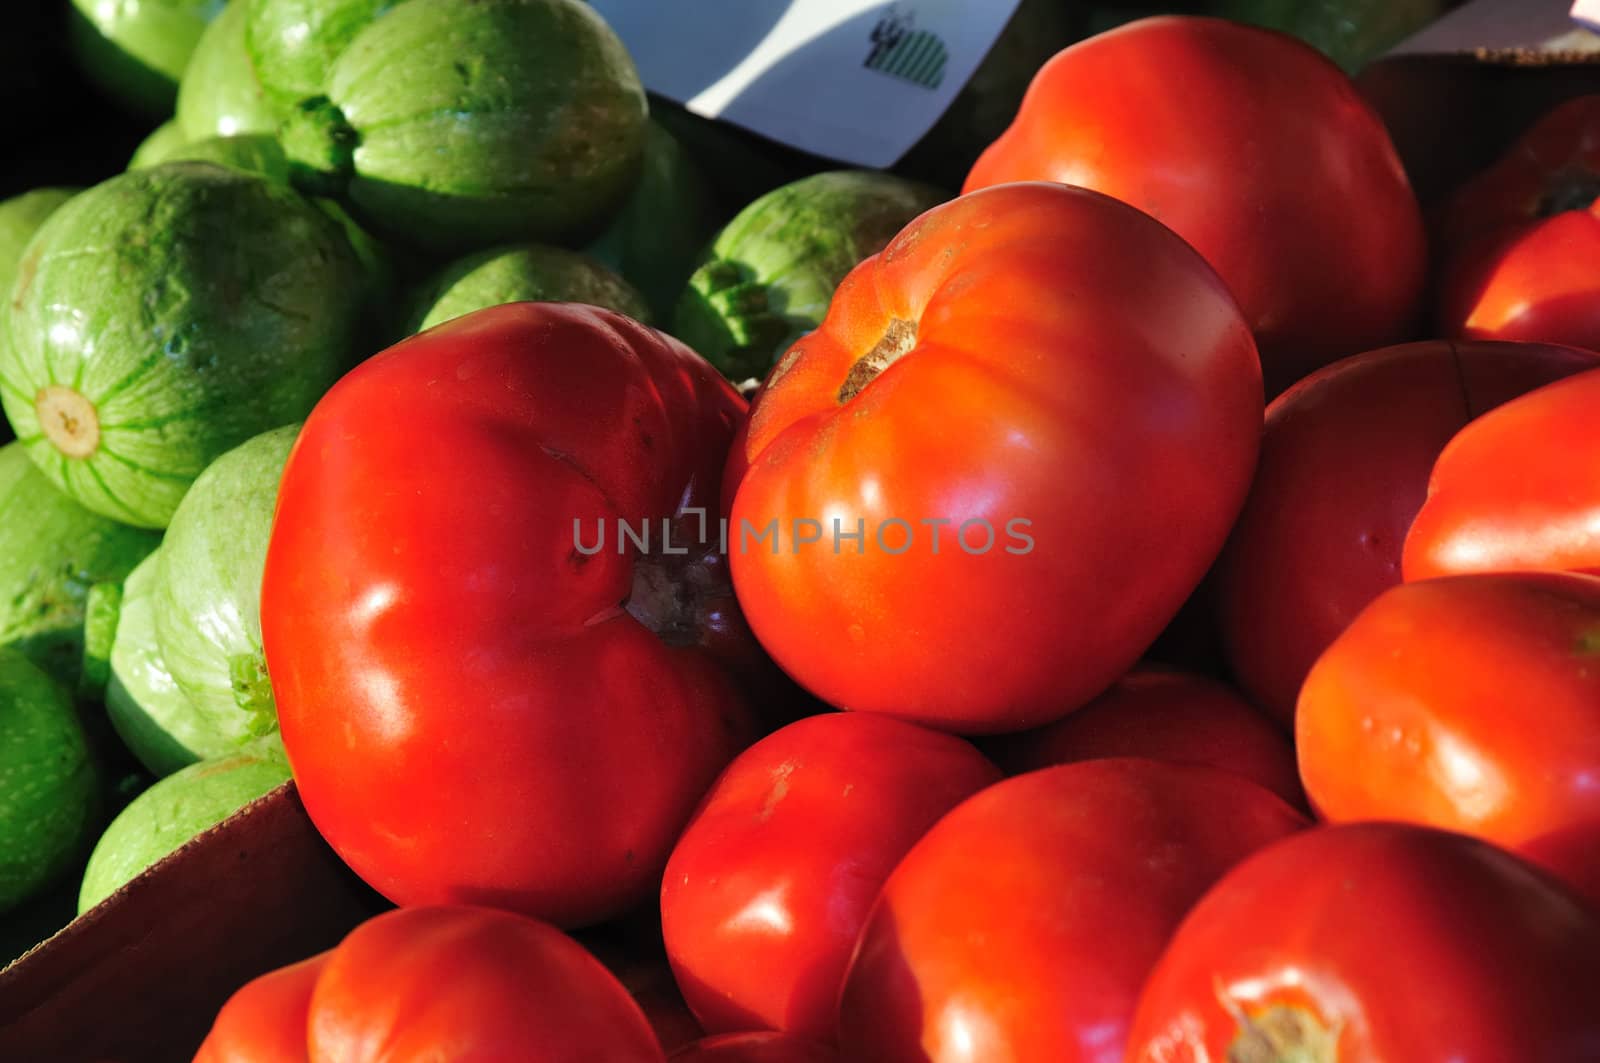 Bright red tomatoes in a farmer's market stall